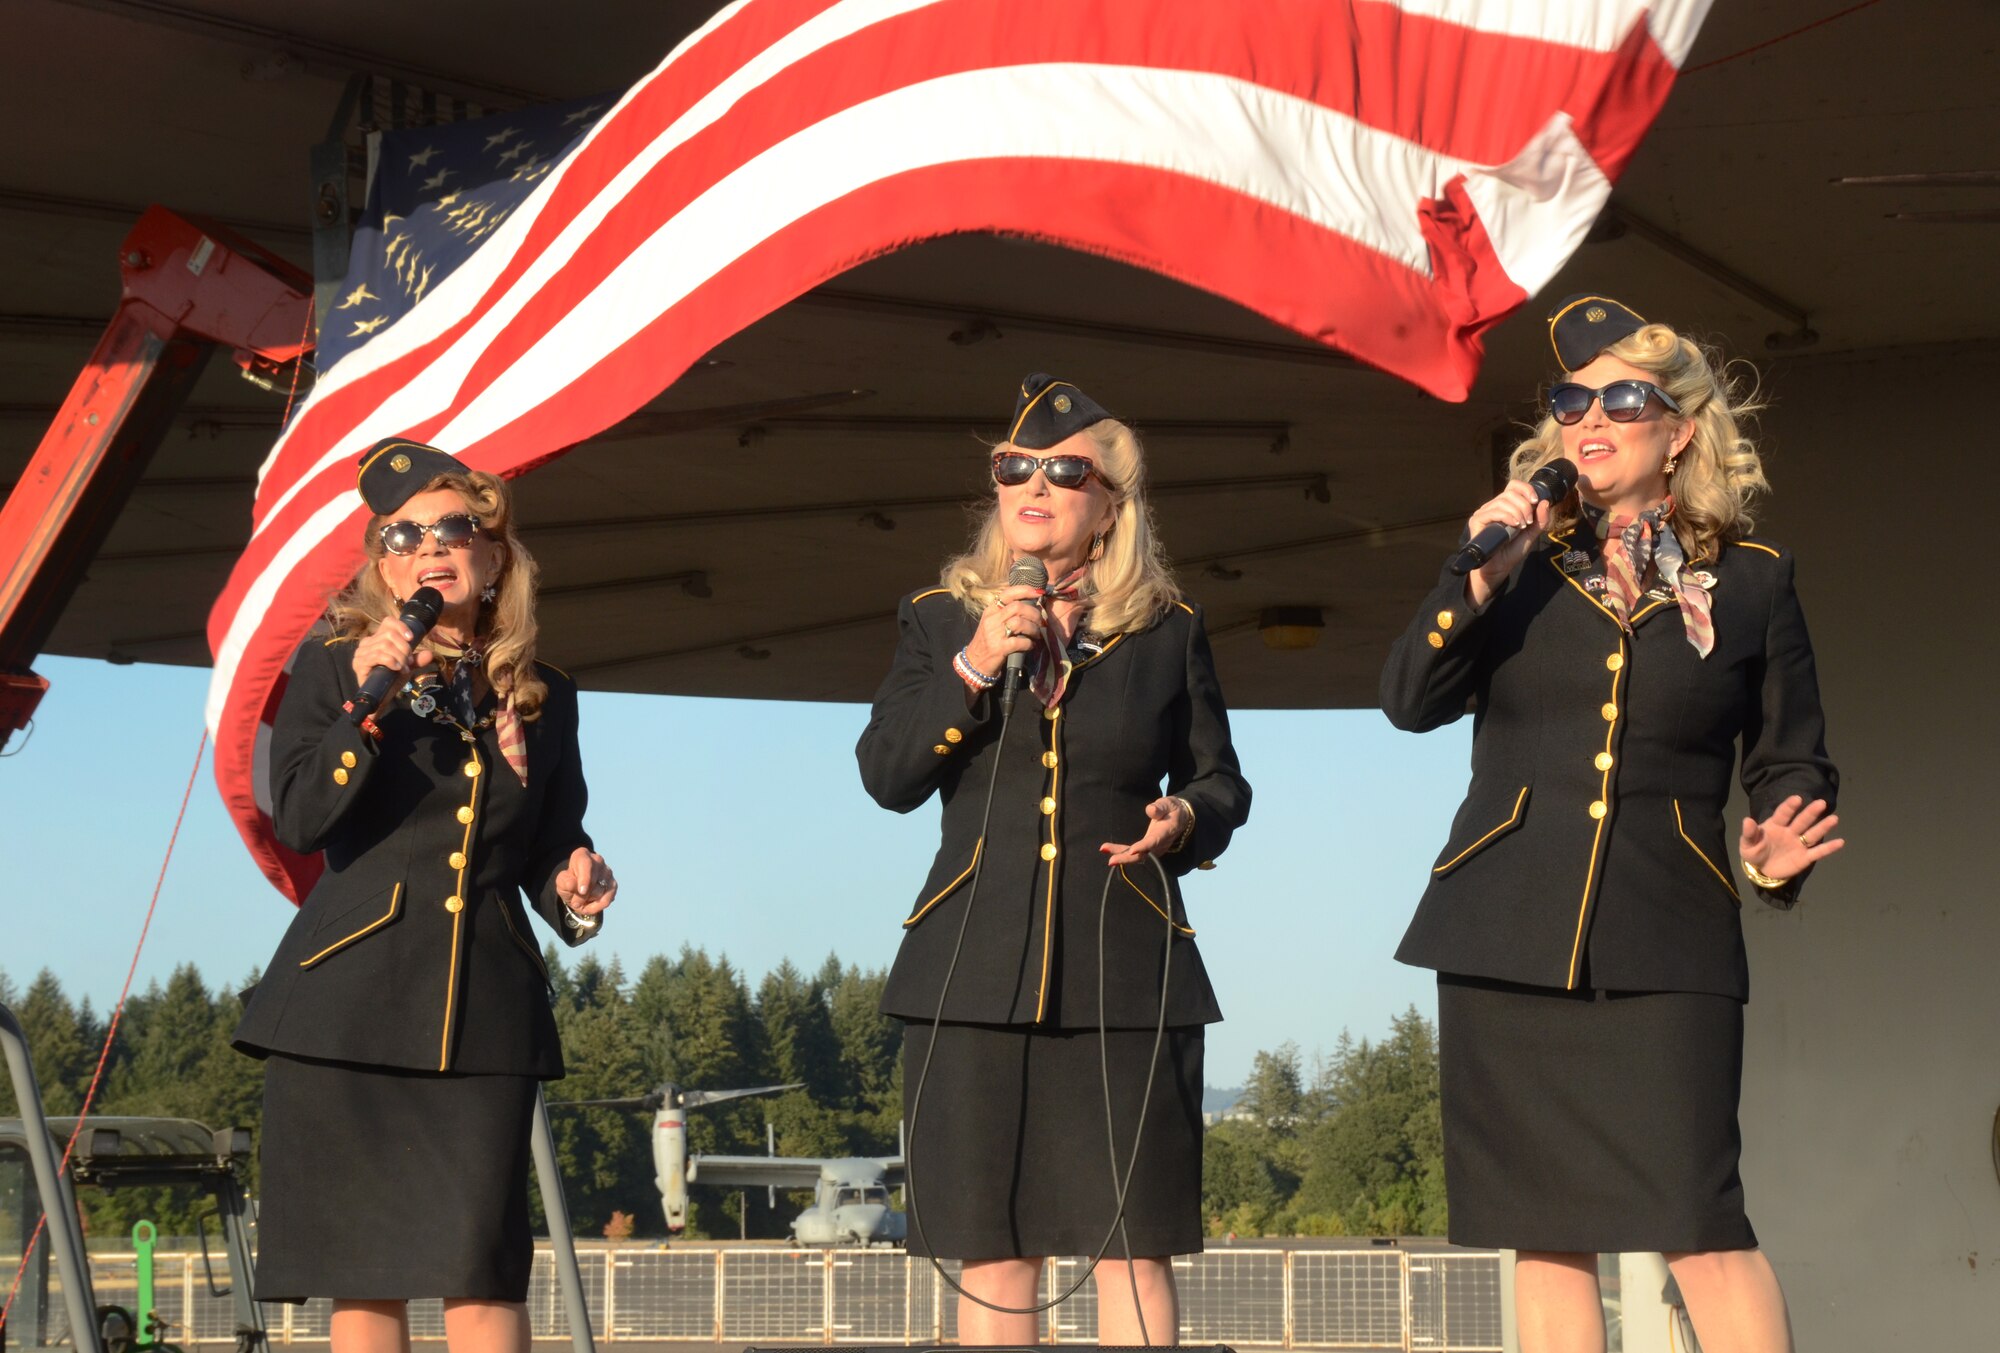 “The Ladies for Liberty,” sing and perform during the Oregon International Air Show afterhours “All Call” celebration as part of the 75th Anniversary of the Oregon Air National Guard during the Oregon International Air Show, Hillsboro, Ore., Aug. 6, 2016. (U.S. Air National Guard photo by Tech. Sgt. John Hughel, 142nd Fighter Wing Public Affairs/Released).